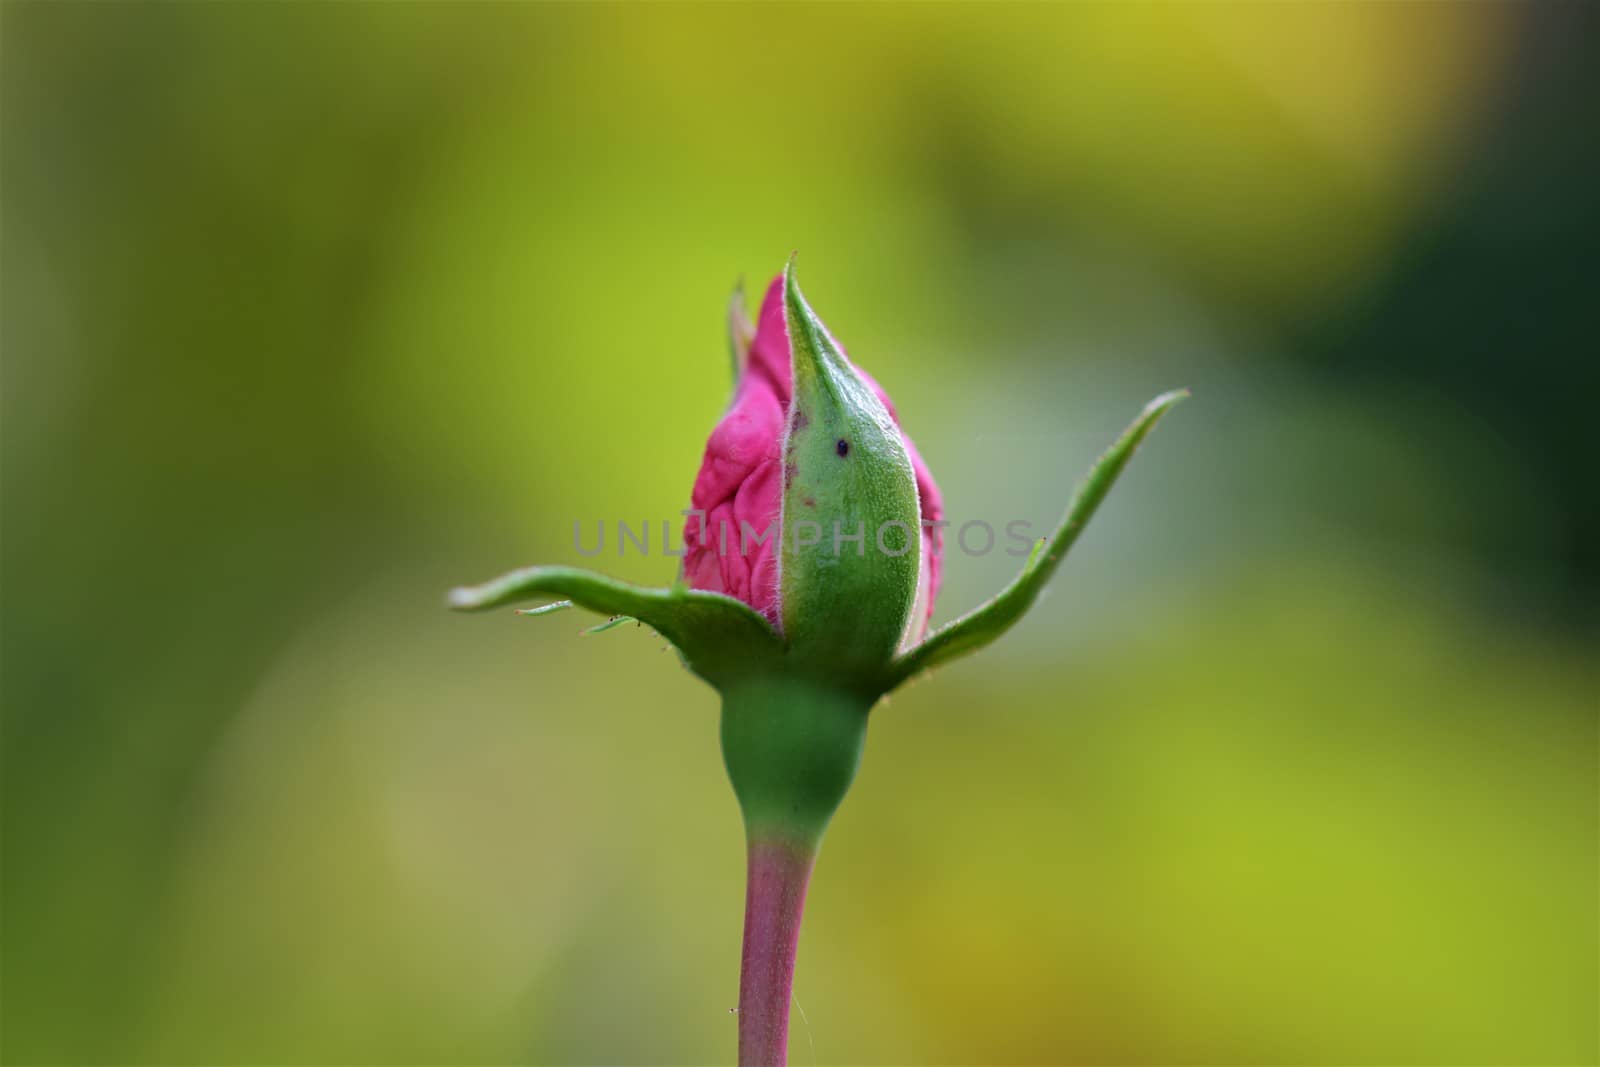 Pink rosebud just opening against blurred yellow green background